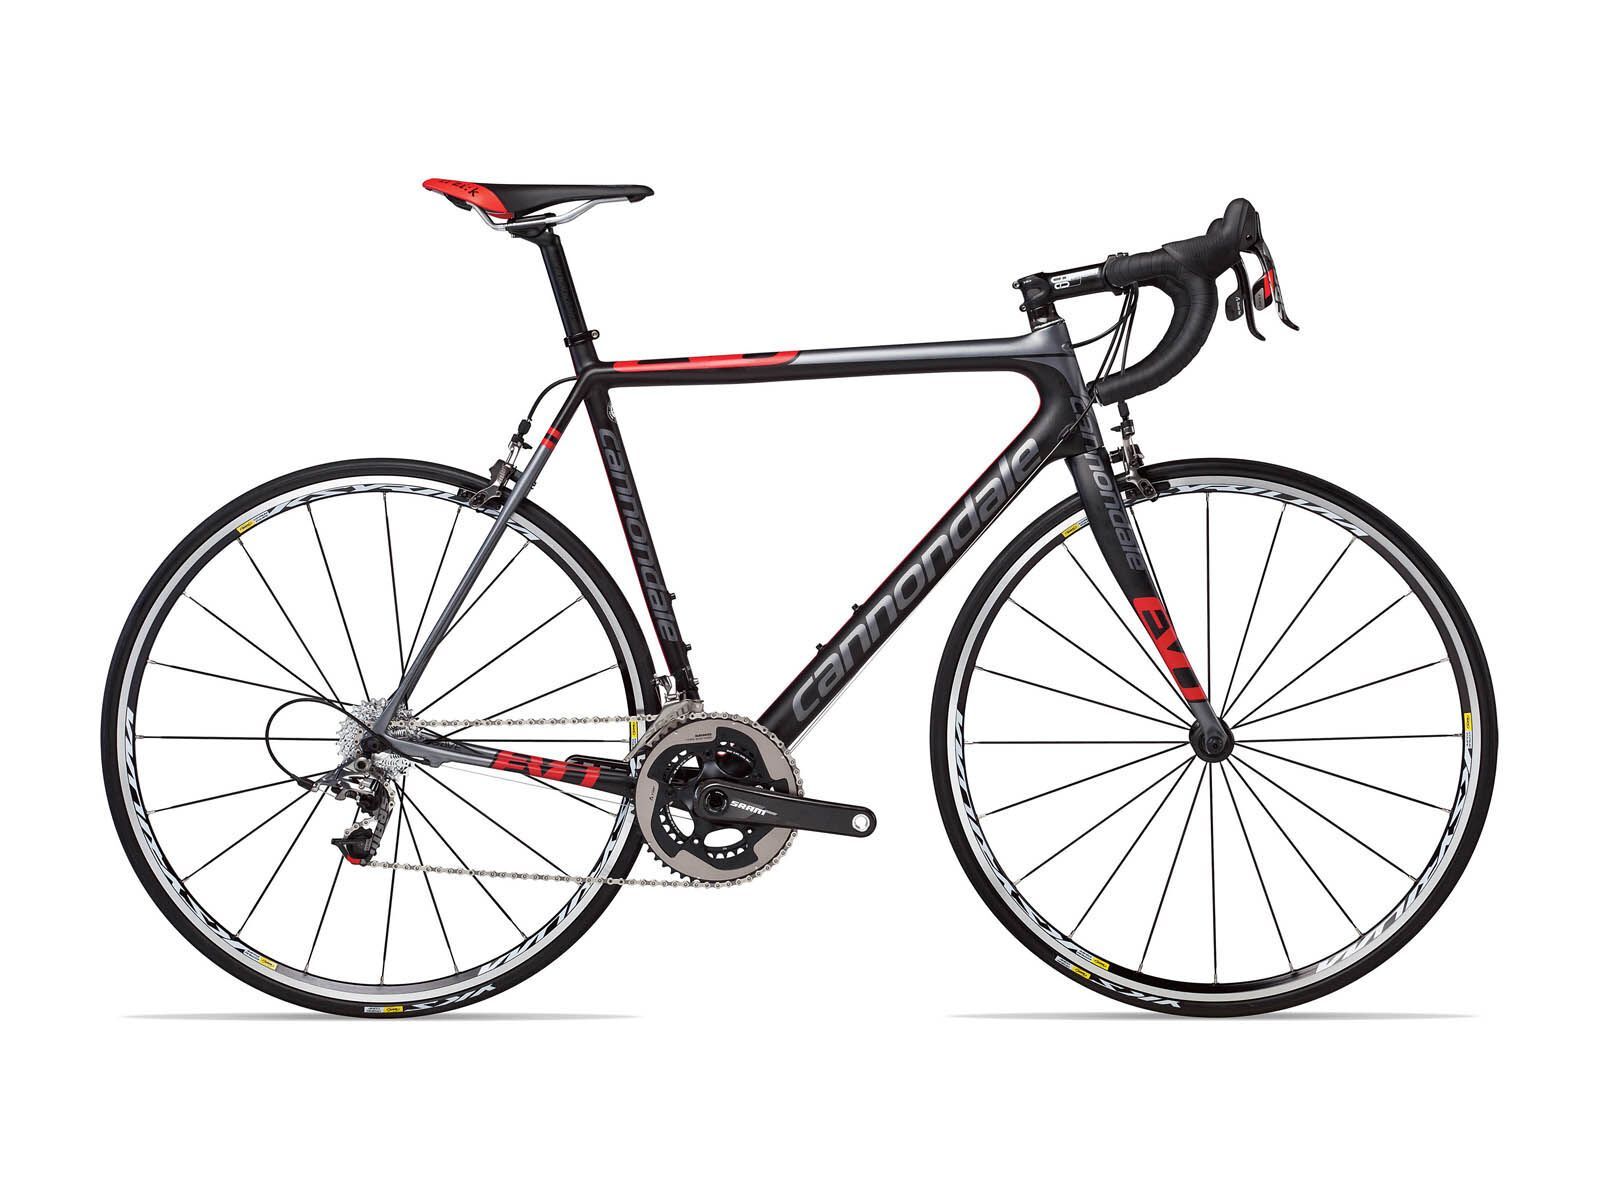 *** 2. Wahl *** Cannondale SuperSix Evo 2 Red 2013, exposed carbon w/ charcoal gray matte - Rennrad | Rahmenhöhe 58 cm | Bild 1